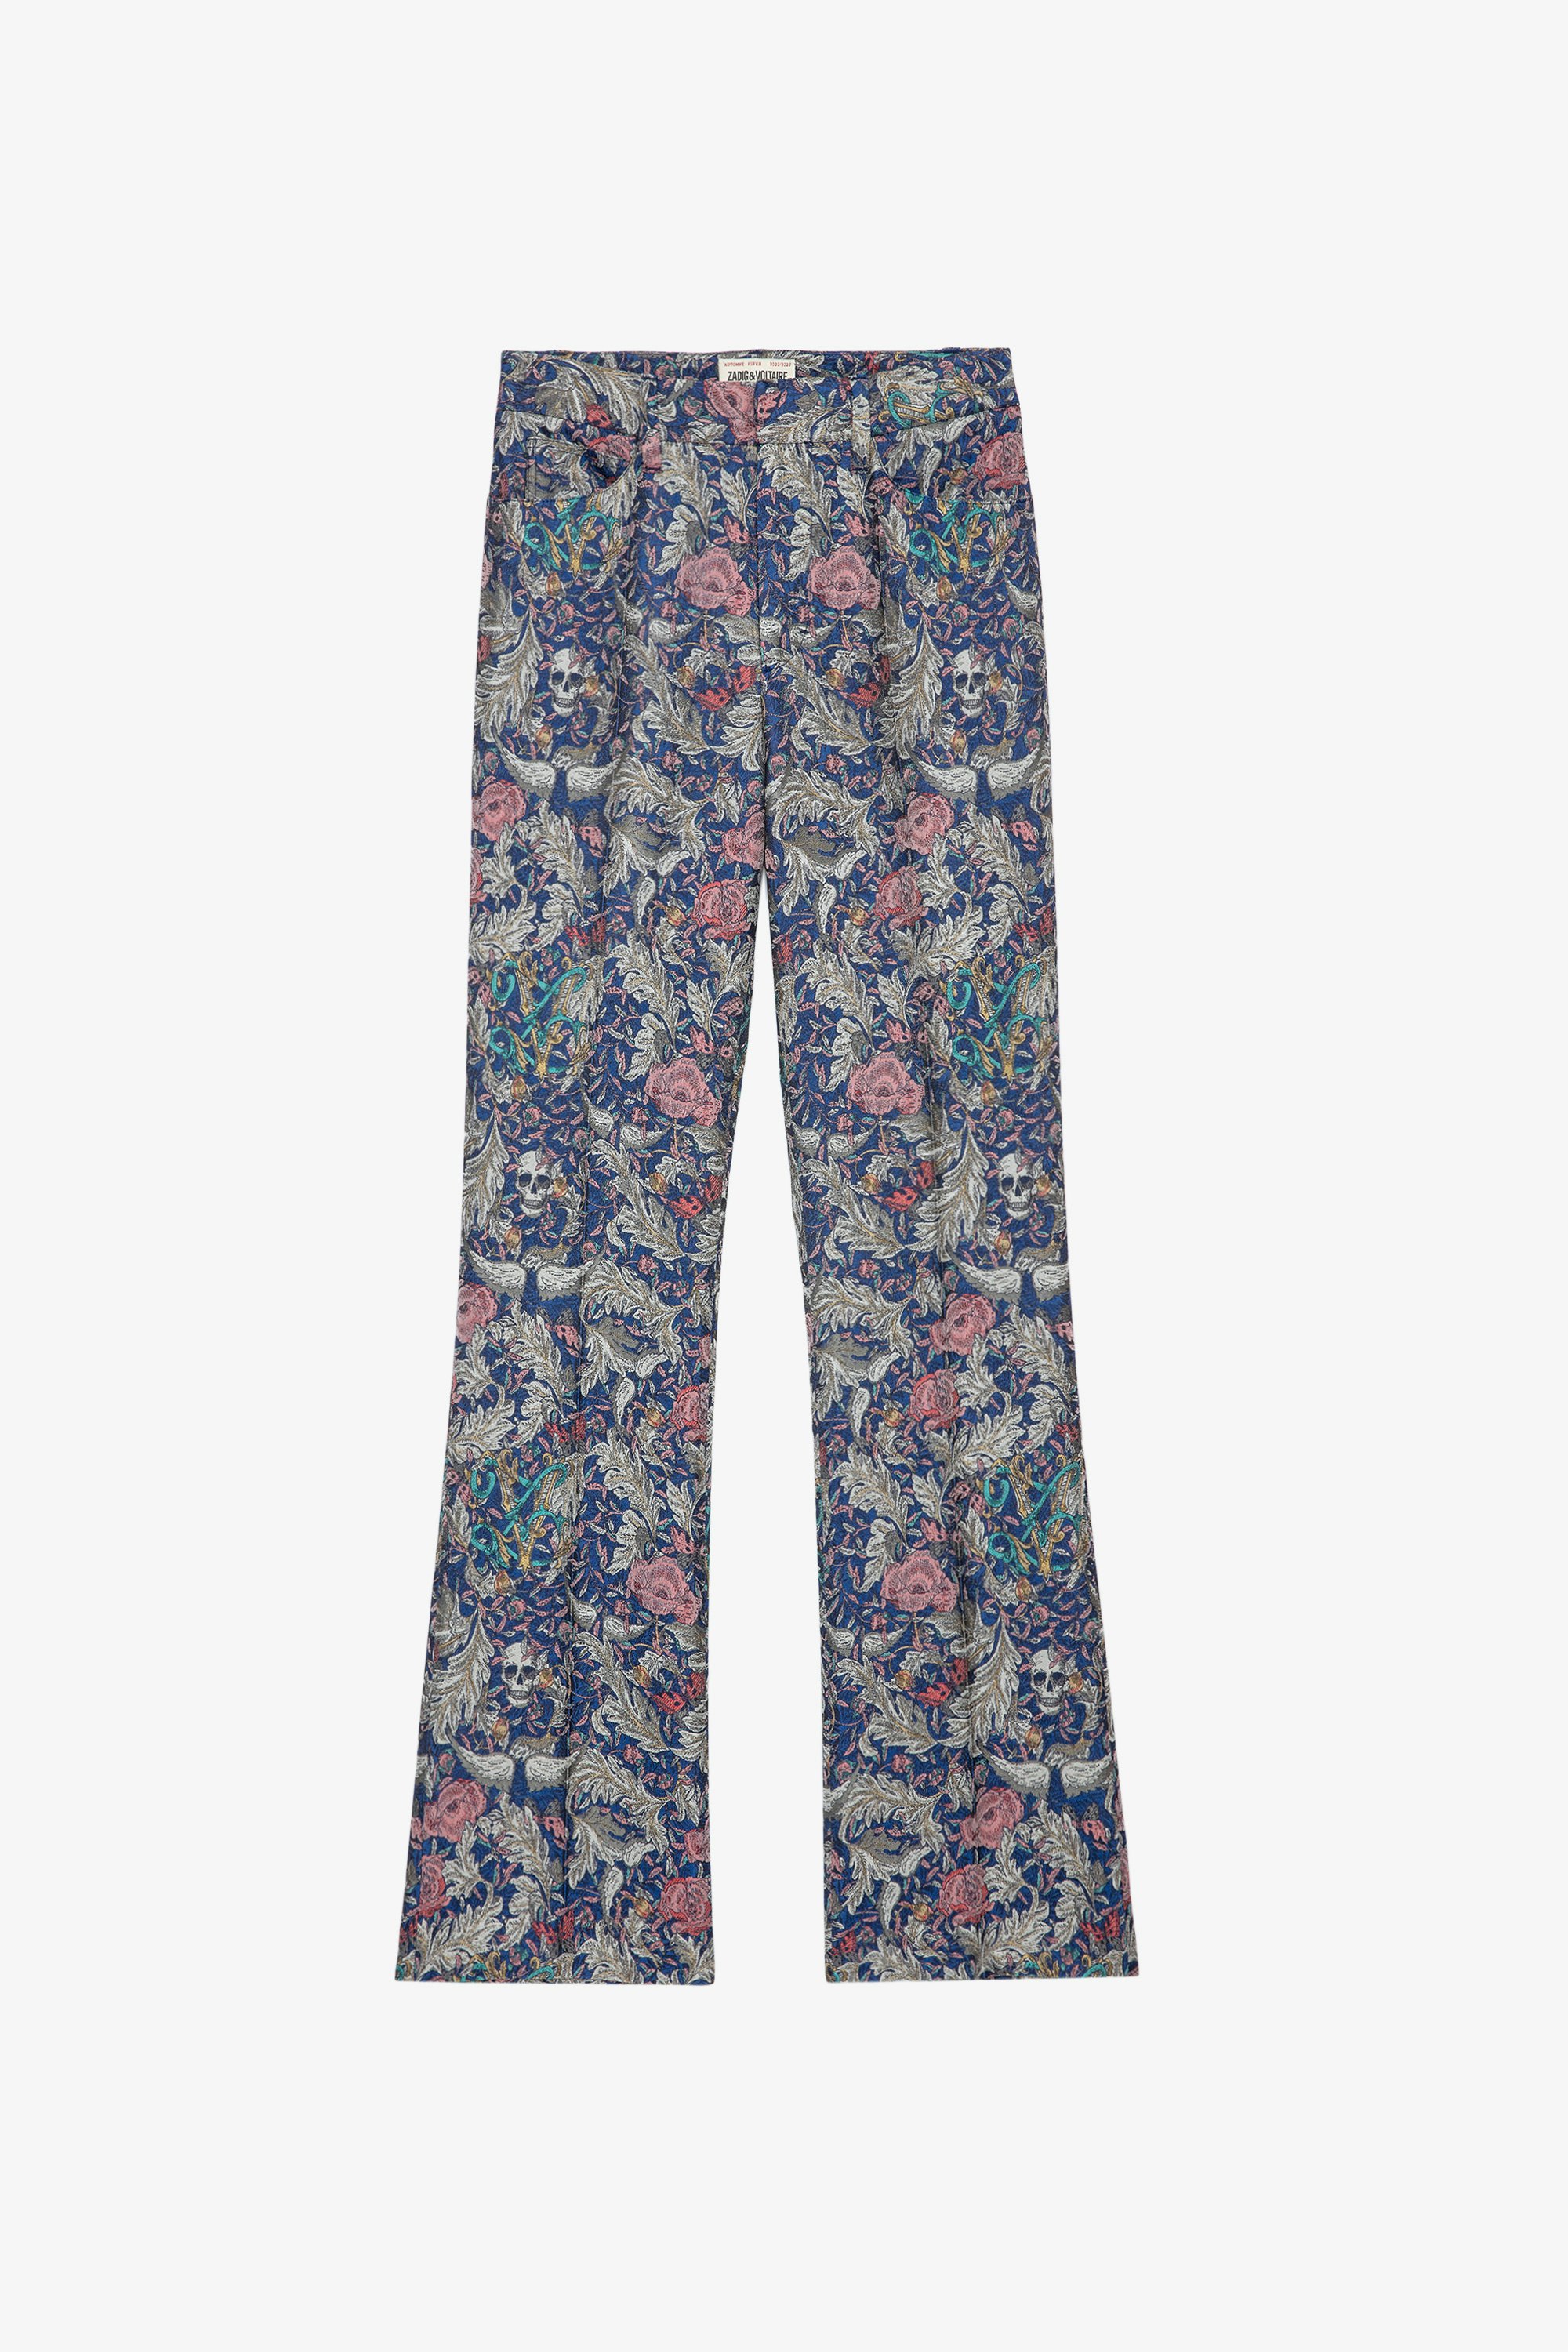 Pistol Jac パンツ Women's blue jacquard trousers with floral motifs 